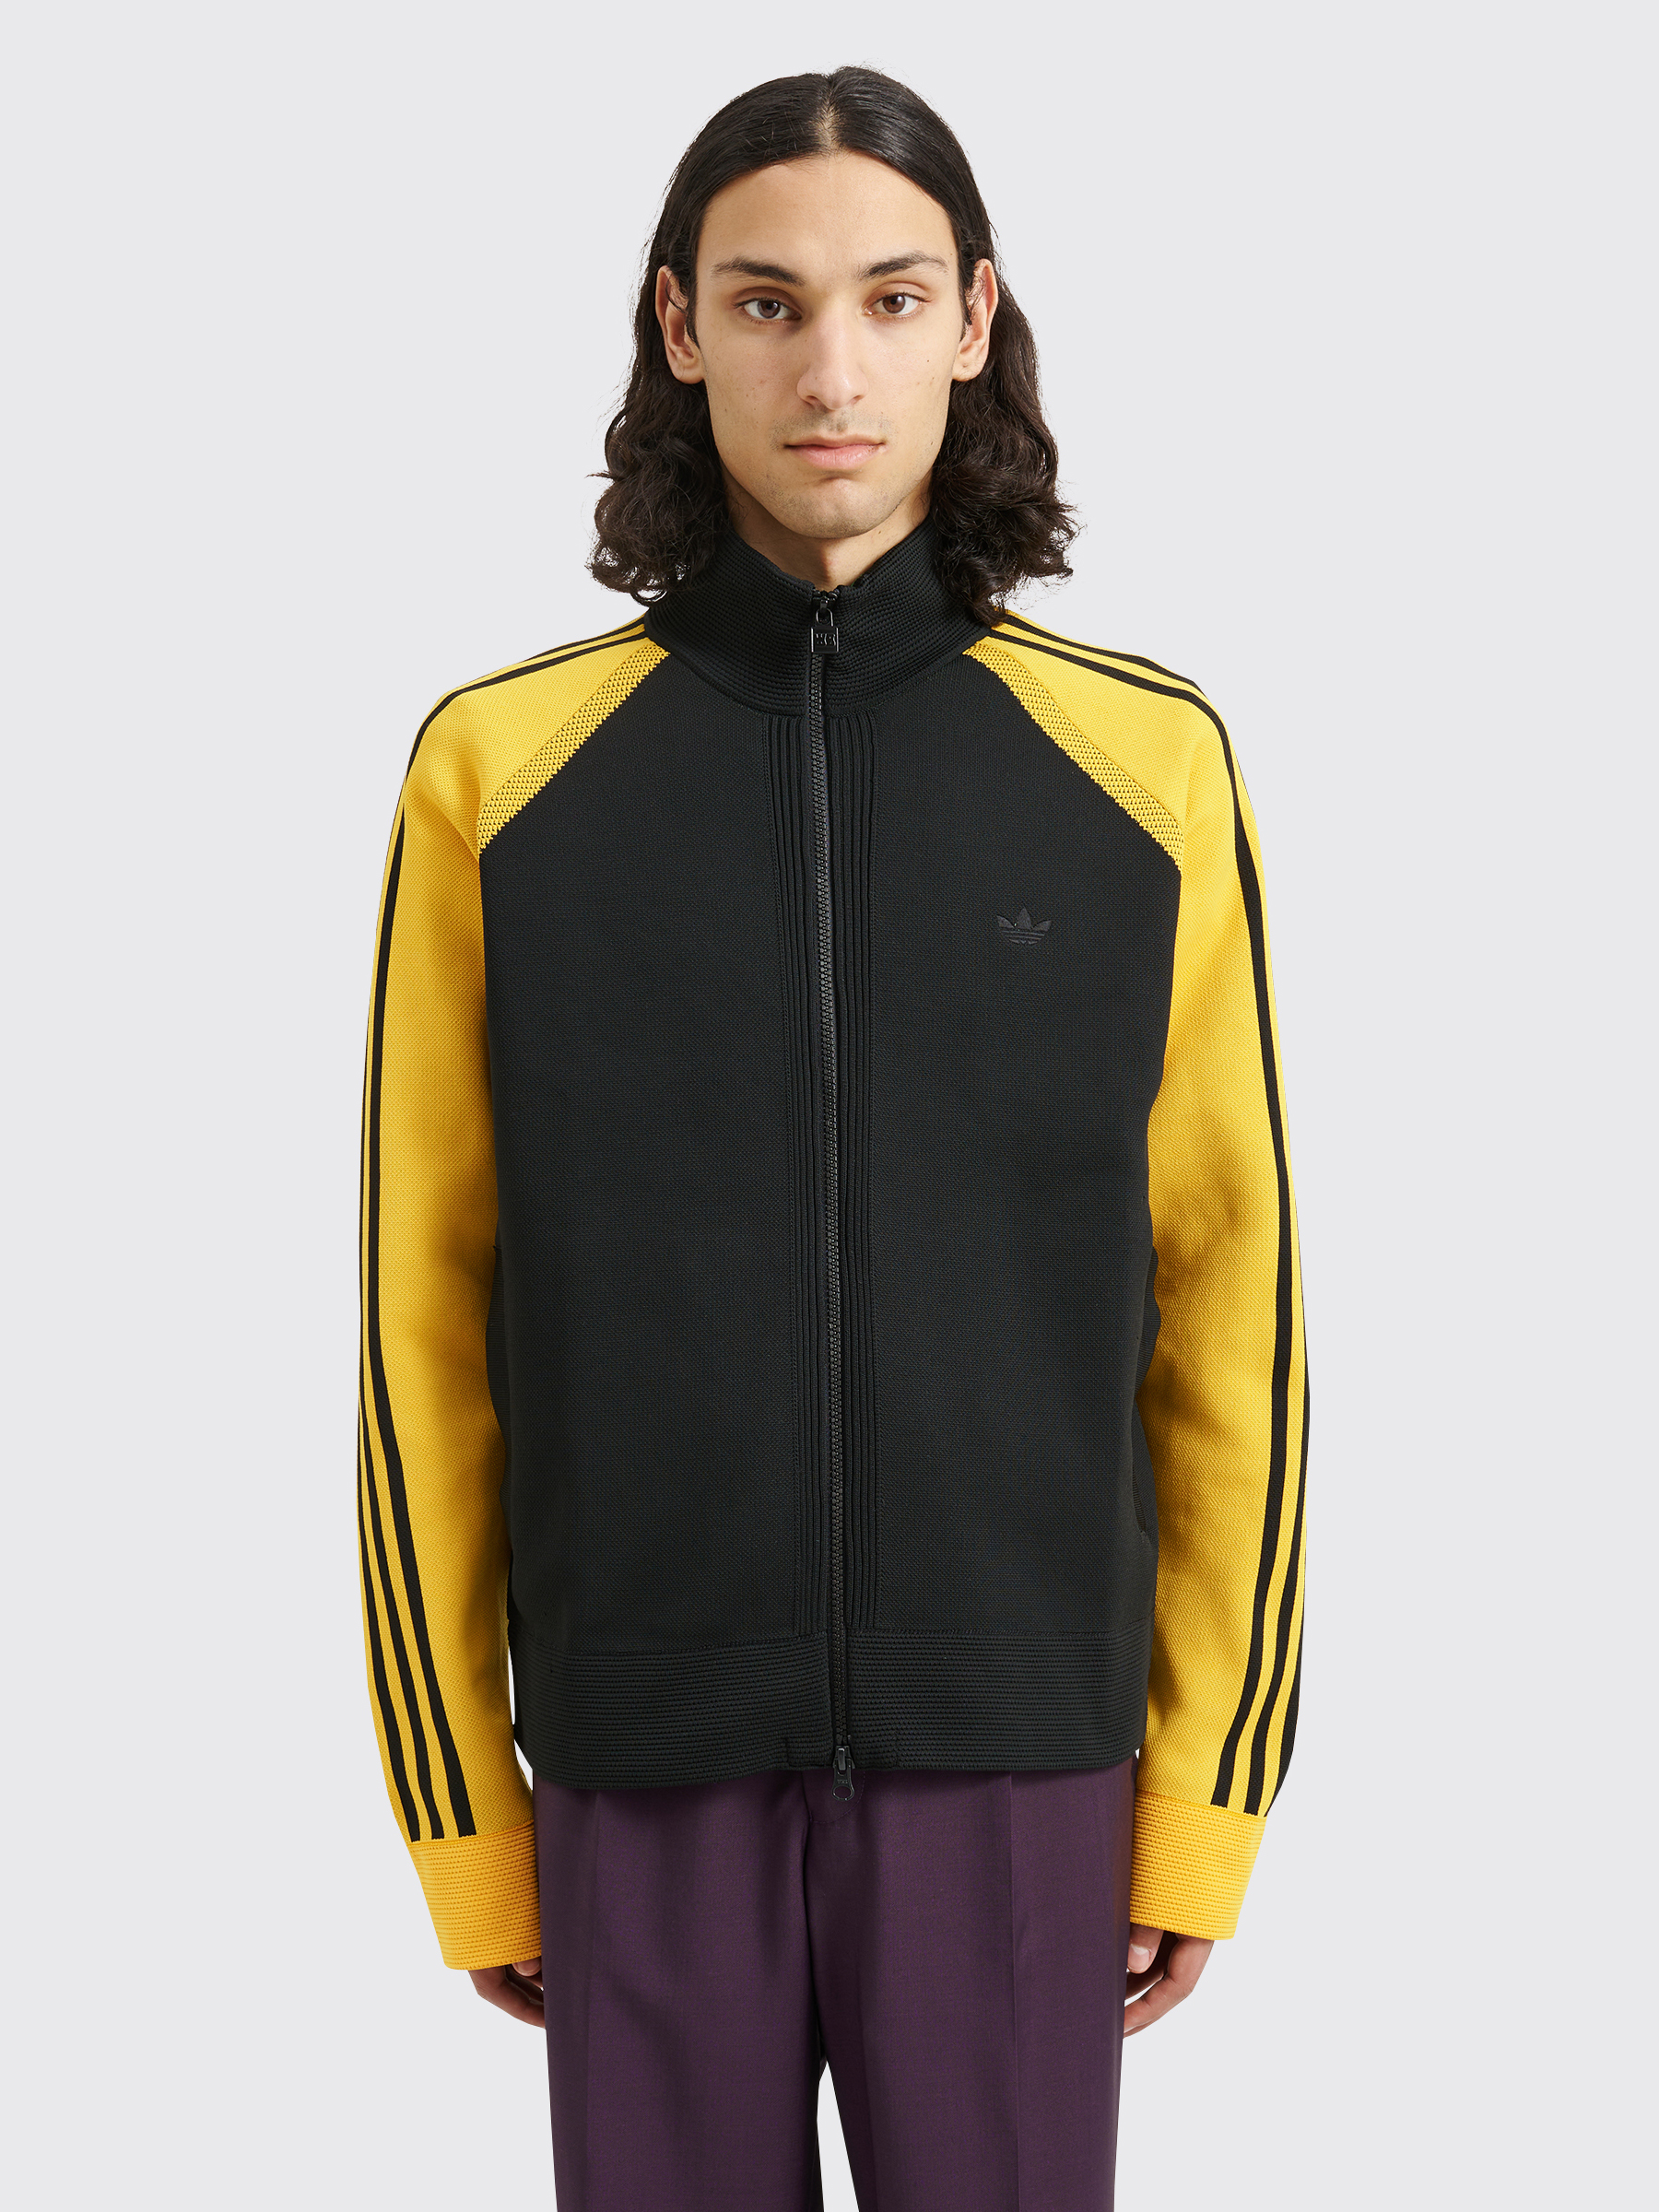 adidas x Wales Bonner Knitted Track Top